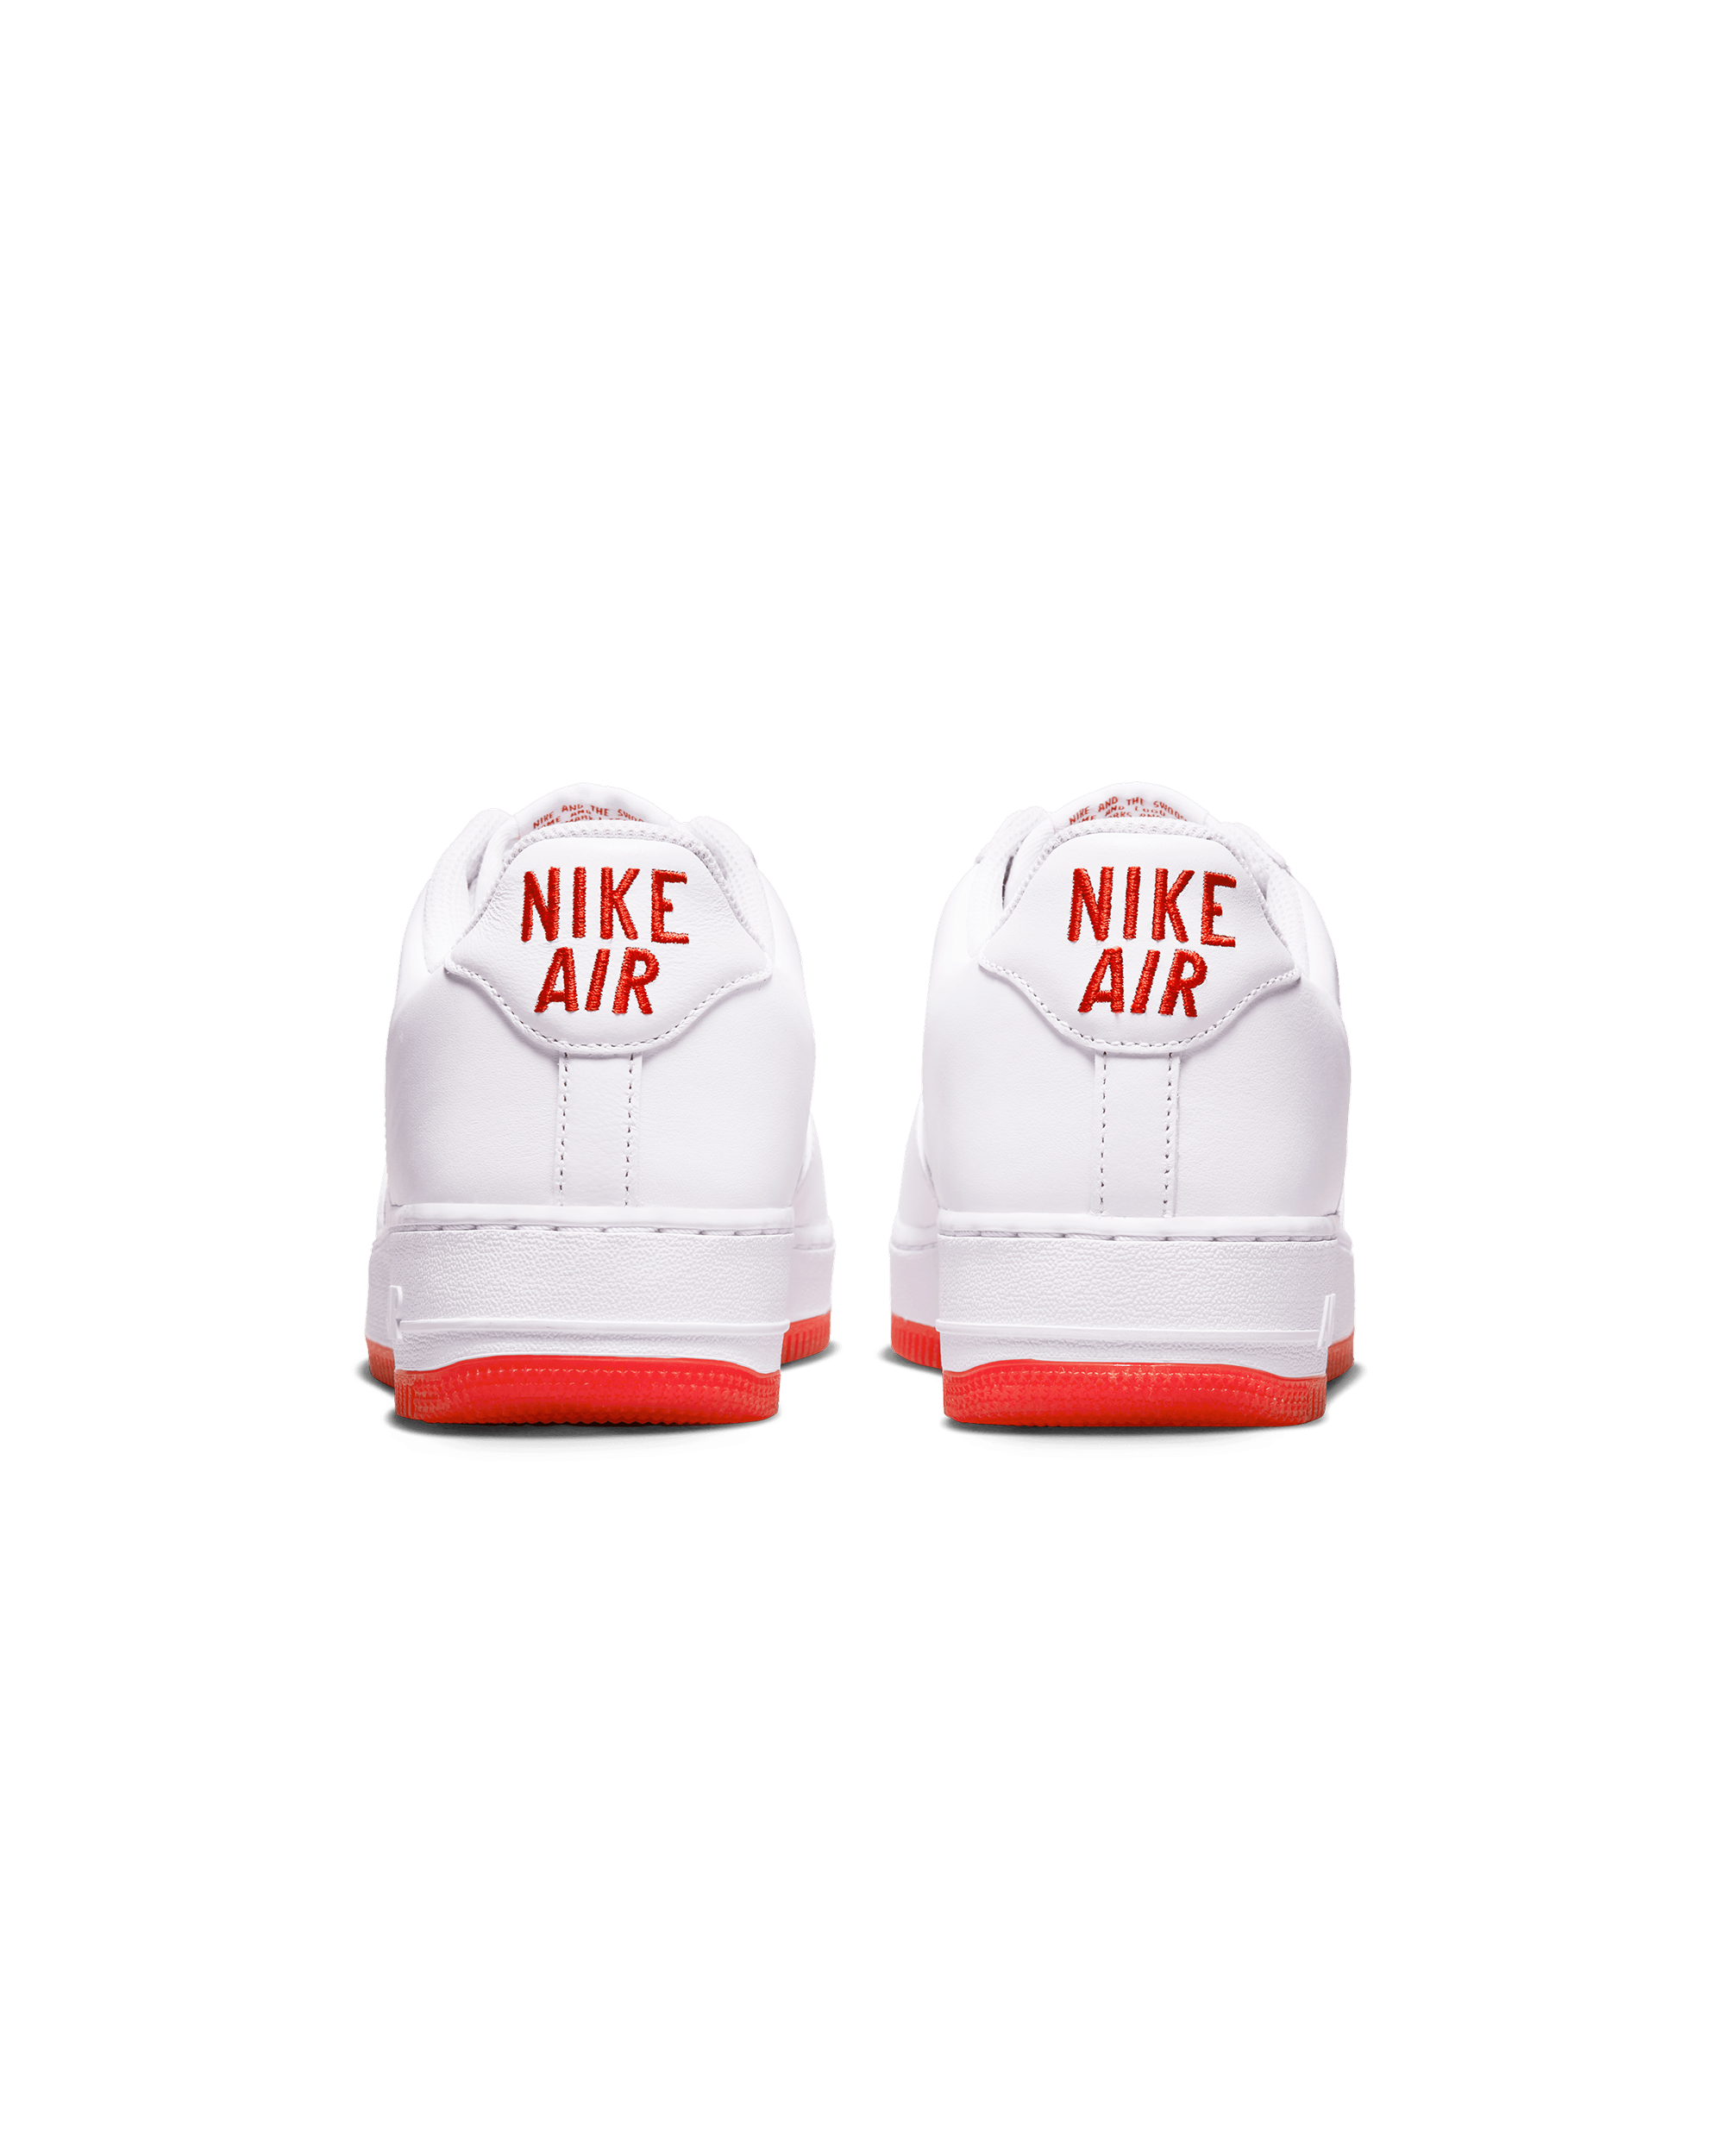 AIR FORCE 1 LOW RETRO - WHITE / UNIVERSITY RED